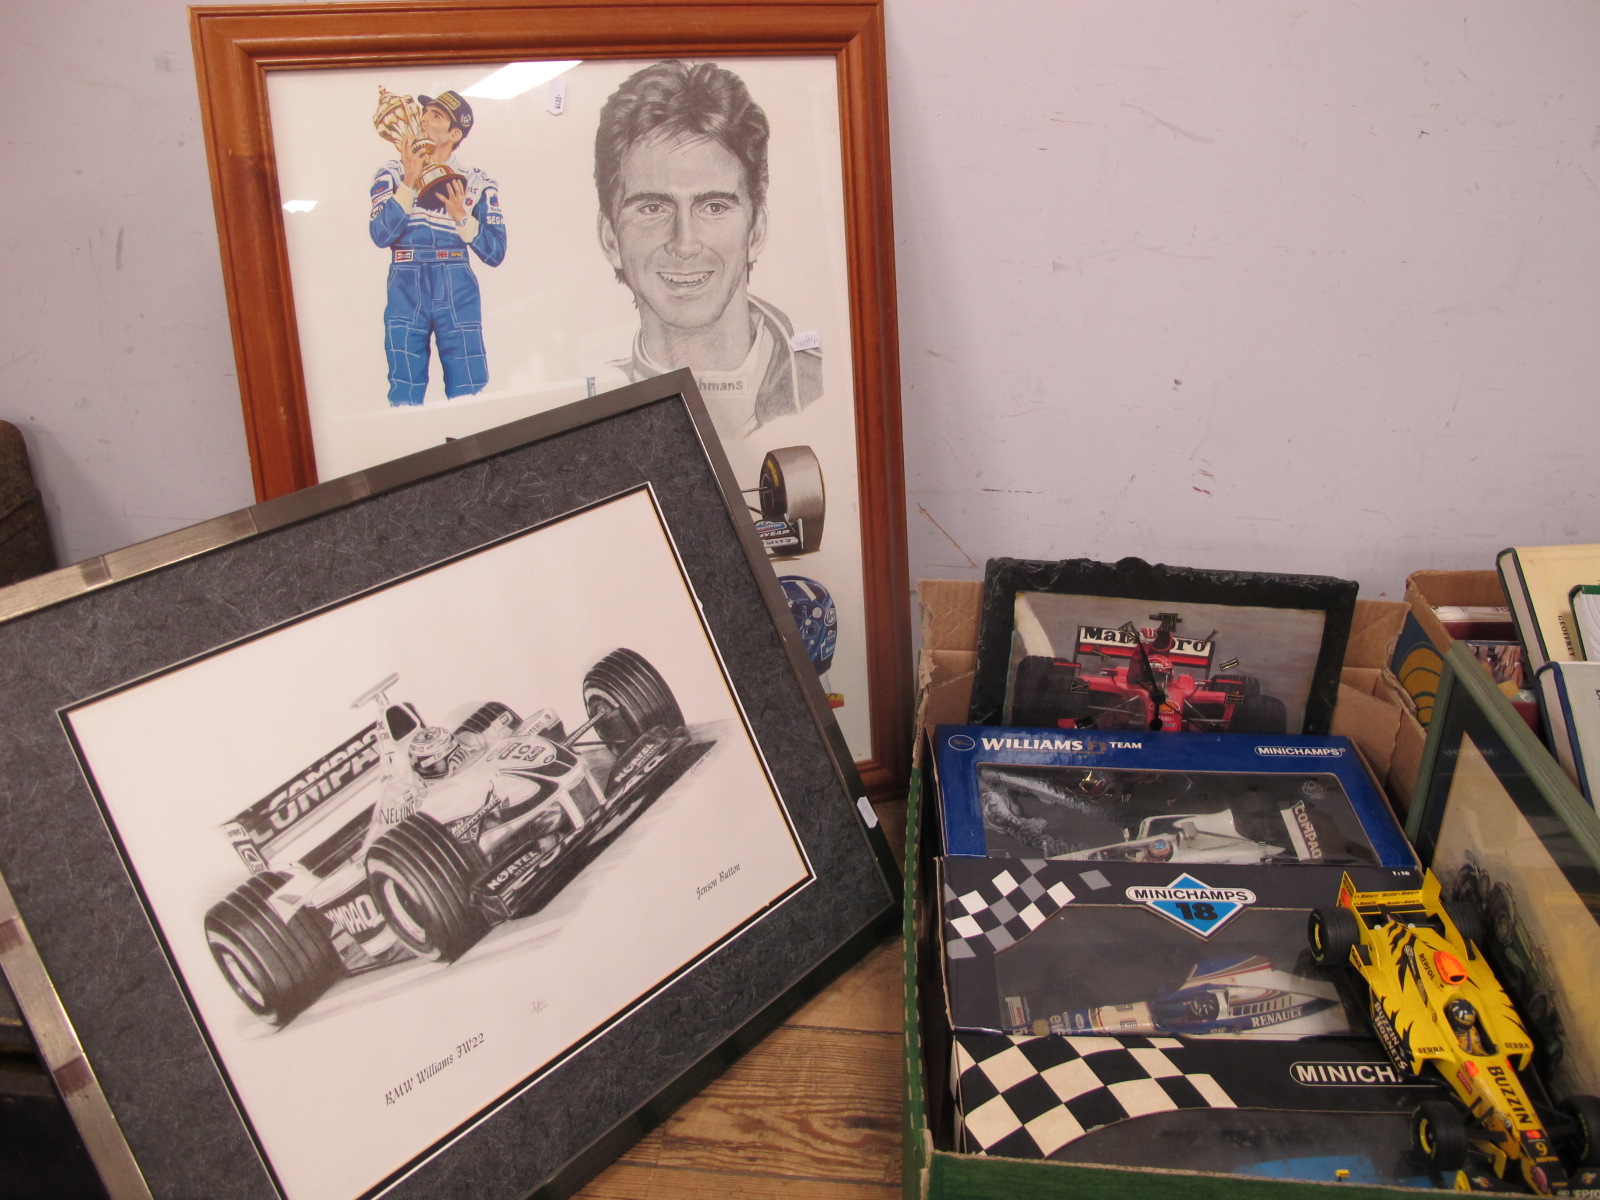 Minichamps Boxed Formula 1 Cars, another unboxed, related prints, slate clock.